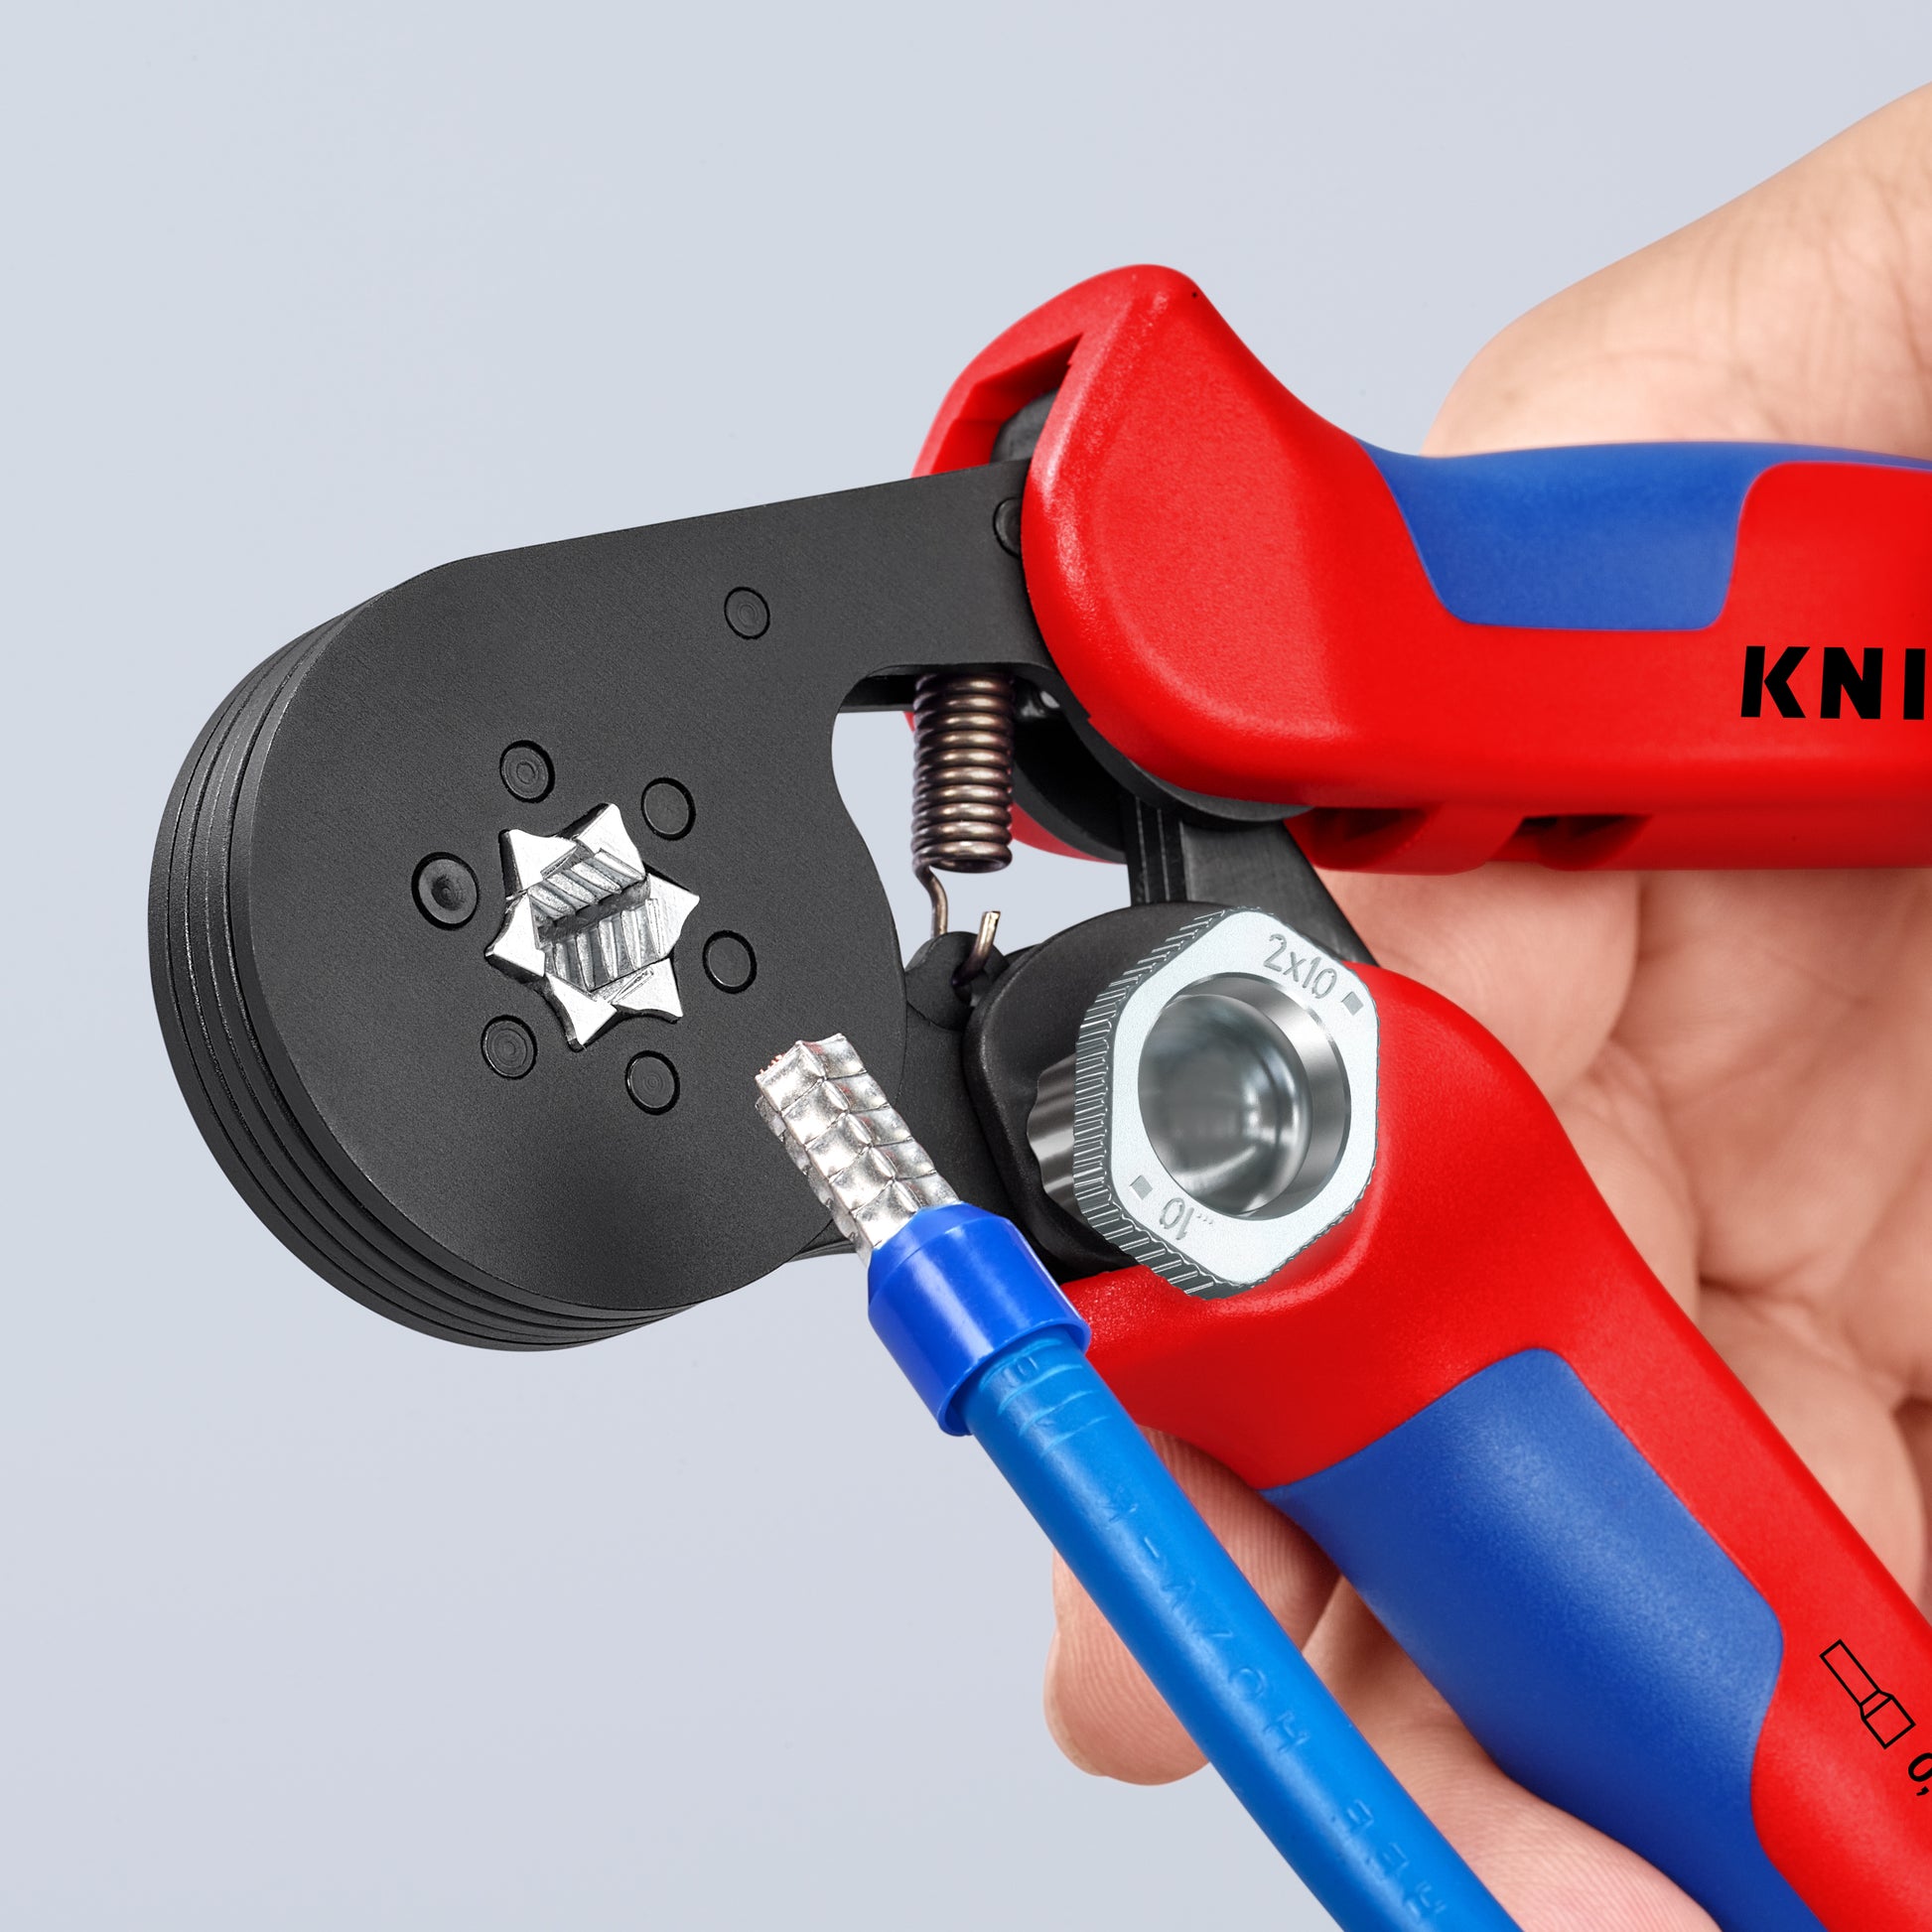 Knipex 7-1/4 Pliers Wrench 8605180 Adjustable Wrench w Comfort Grips